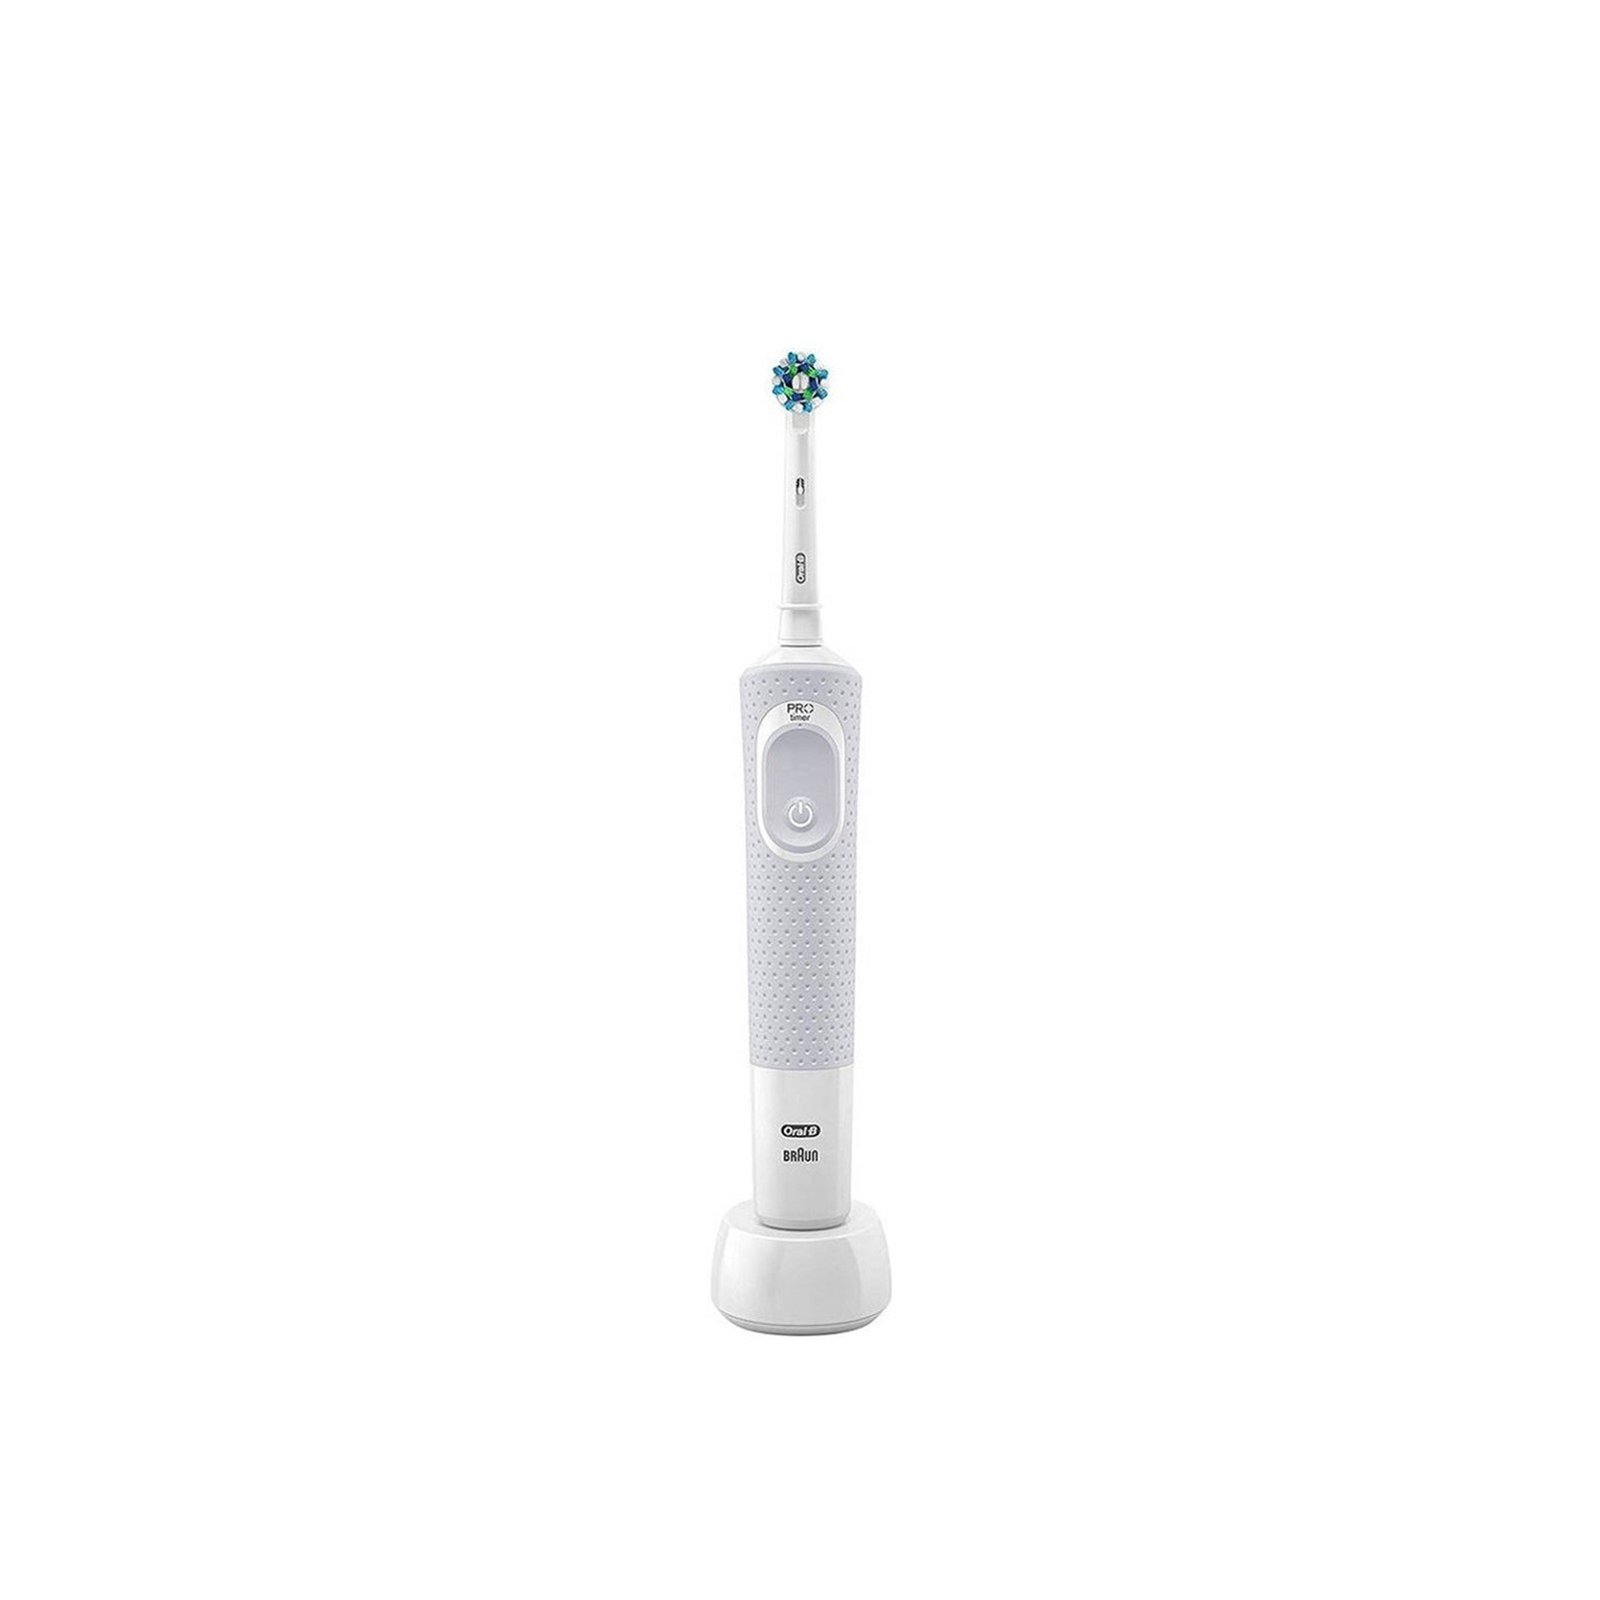 Oral-B Vitality CrossAction 100 White Electric Toothbrush